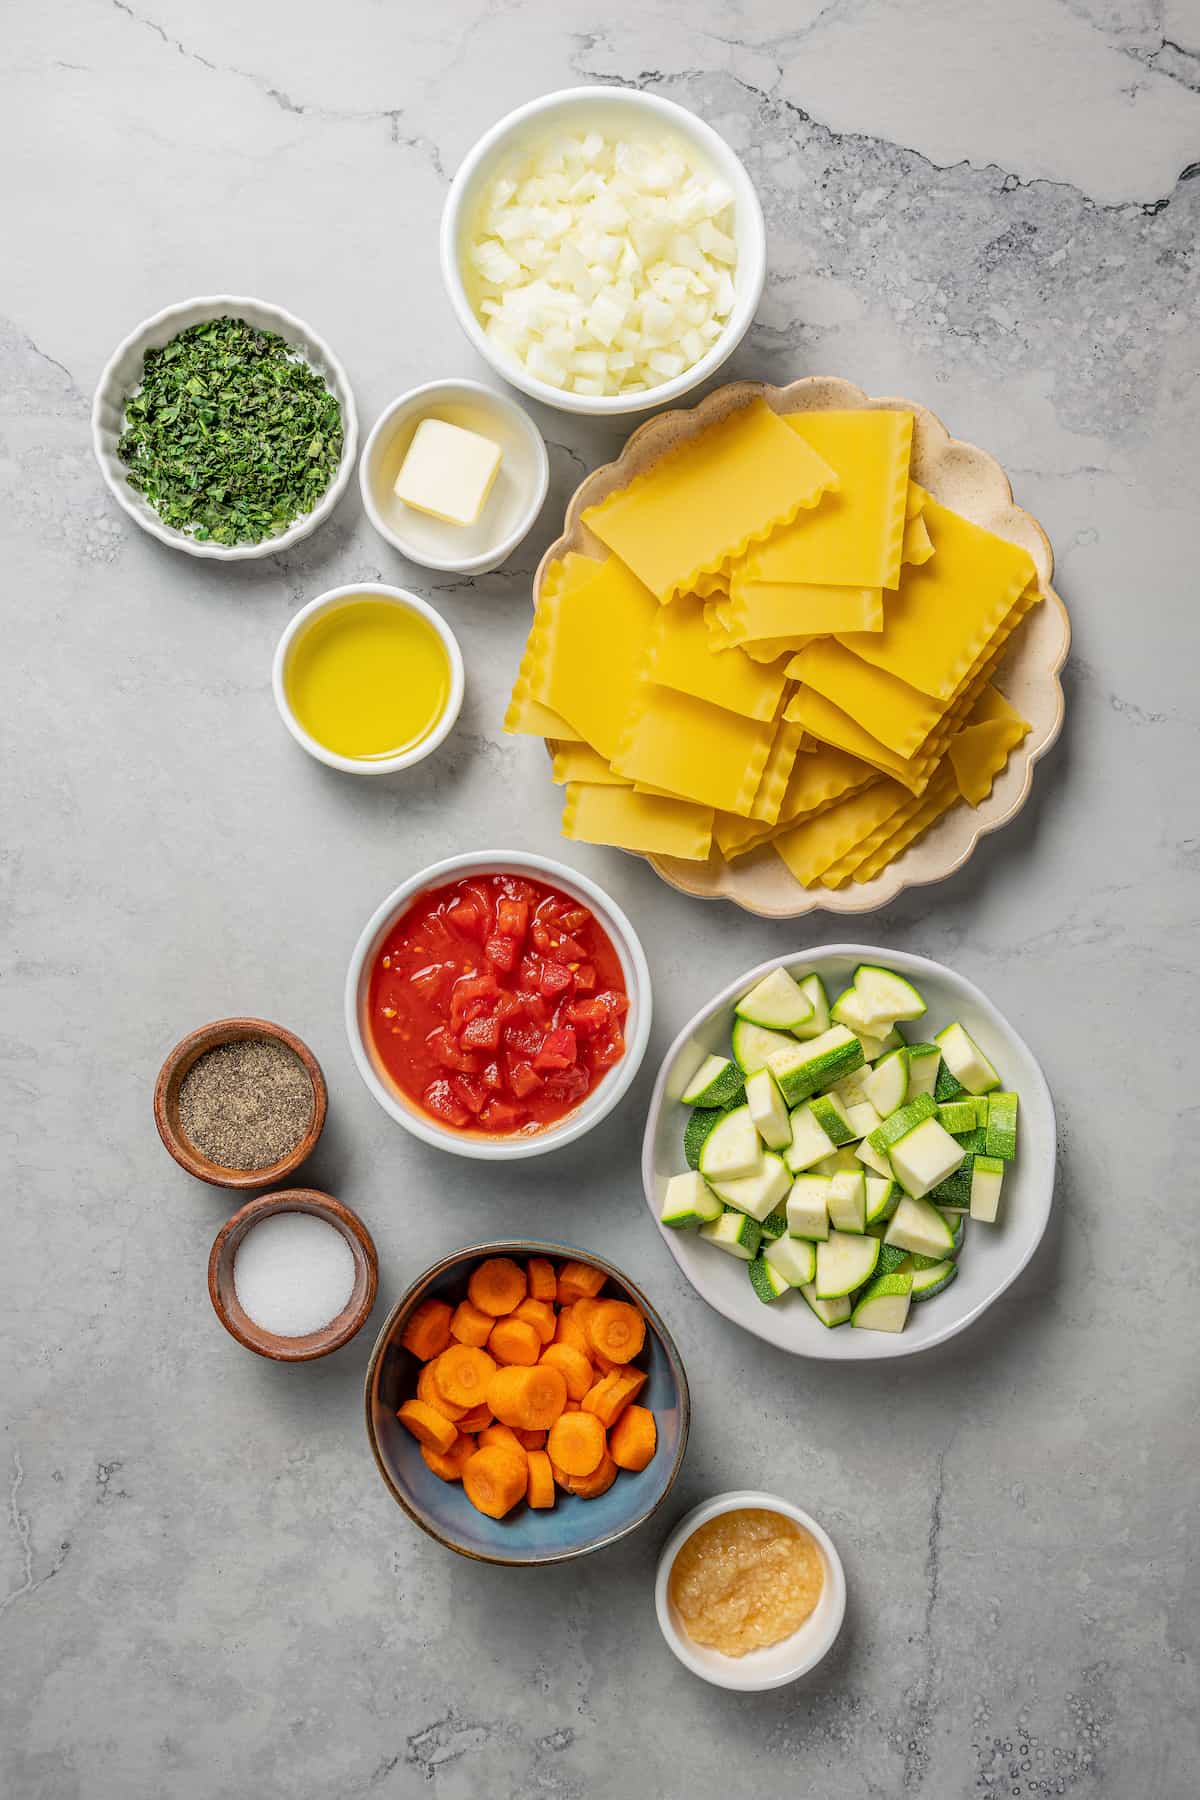 Overhead view of the ingredients needed for skillet lasagna: a plate of lasagna noodles, a bowl of zucchini, a bowl of carrots, a bowl of canned tomatoes, a bowl of onions, a bowl of basil, a bowl of garlic, a bowl of butter, a bowl of olive oil, a bowl of salt, and a bowl of pepper